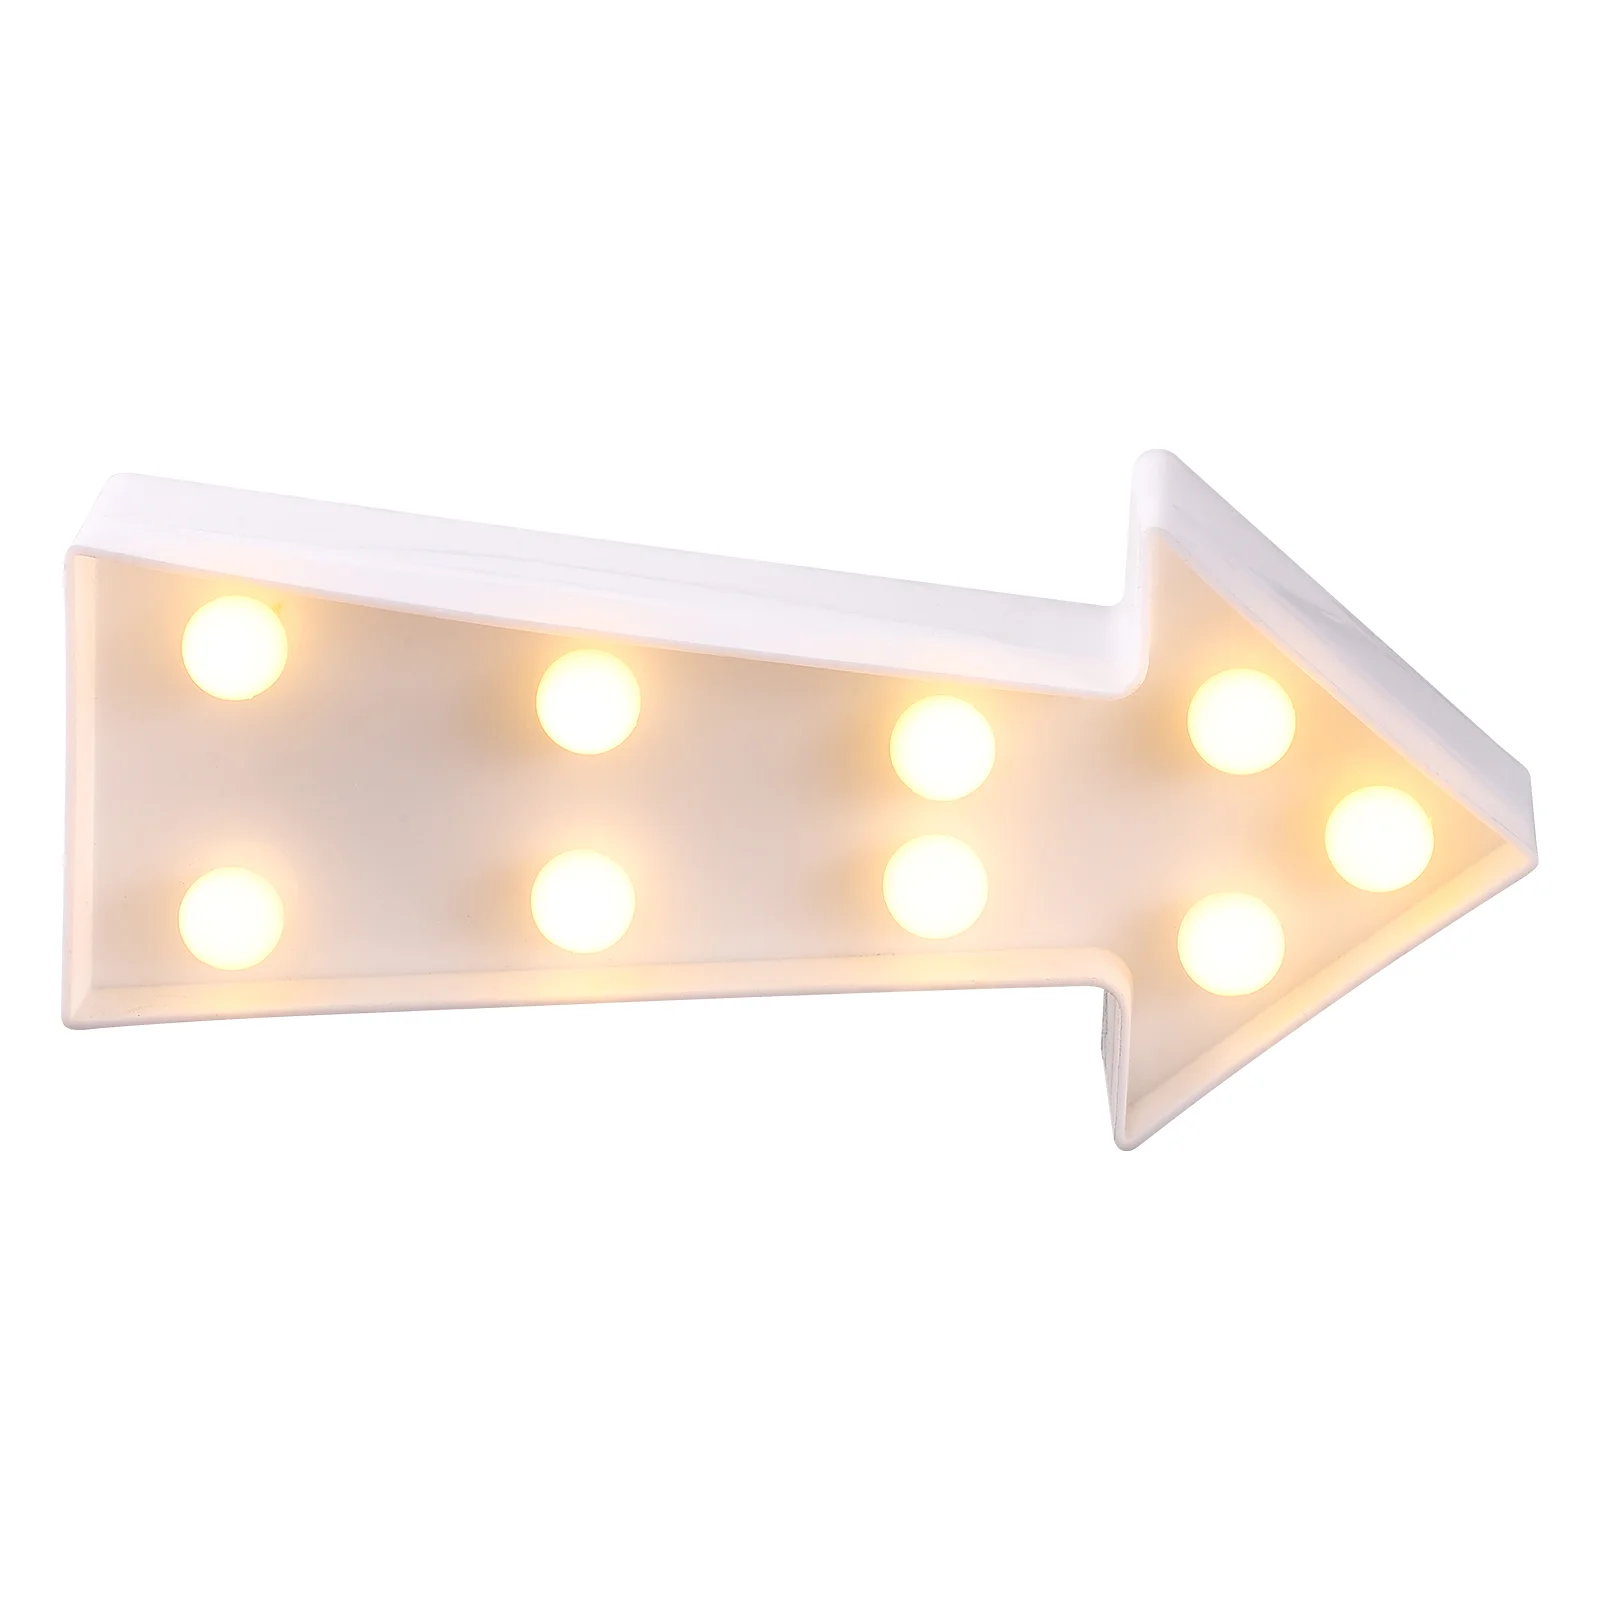 

Light Sign Led Night Marquee Wall Decor Shaped Plastic Corridor Lights Lamp Directions Powered Signs Up White Bar Shape 3D Room